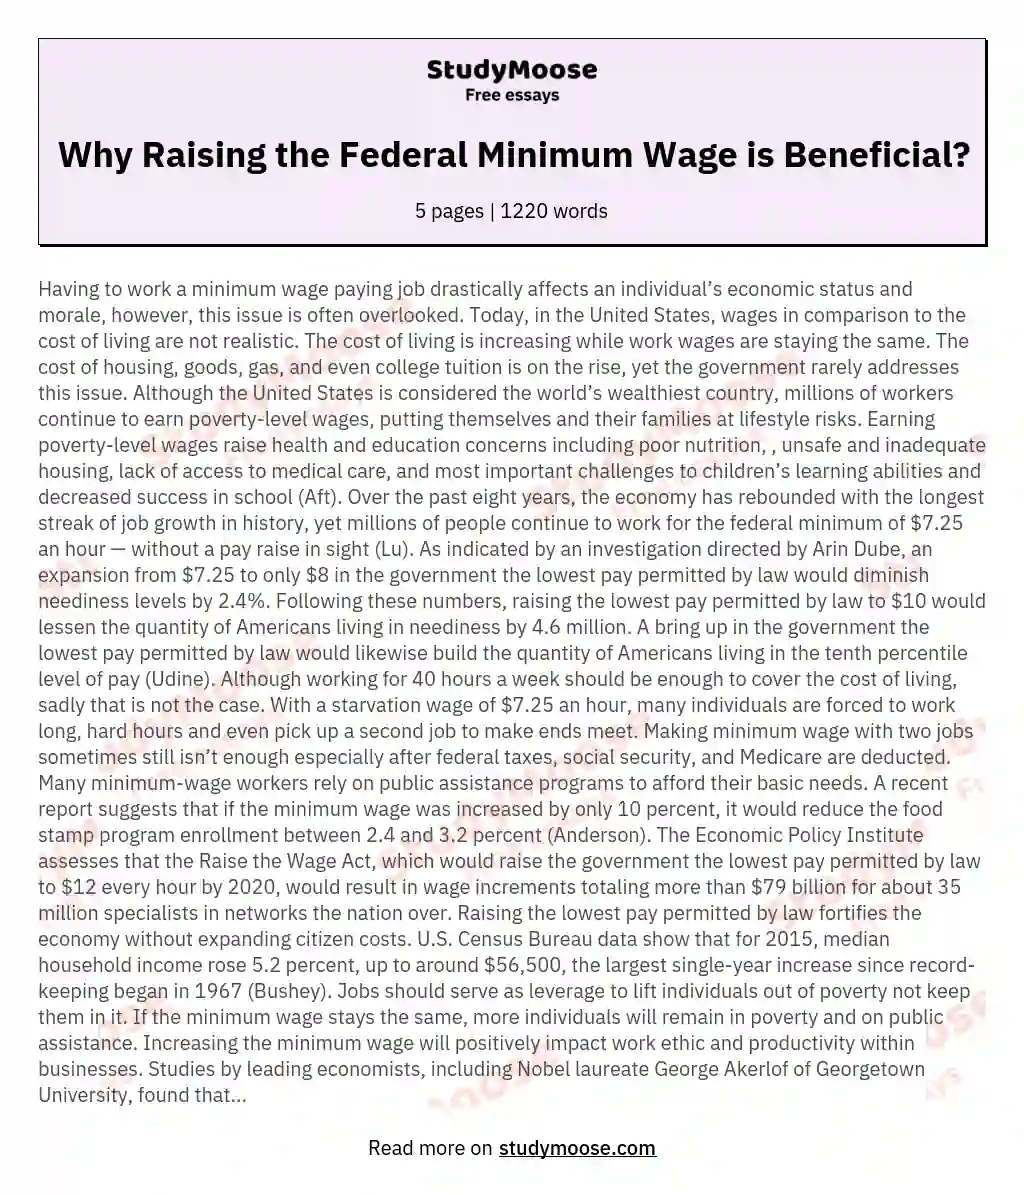 Why Raising the Federal Minimum Wage is Beneficial? essay